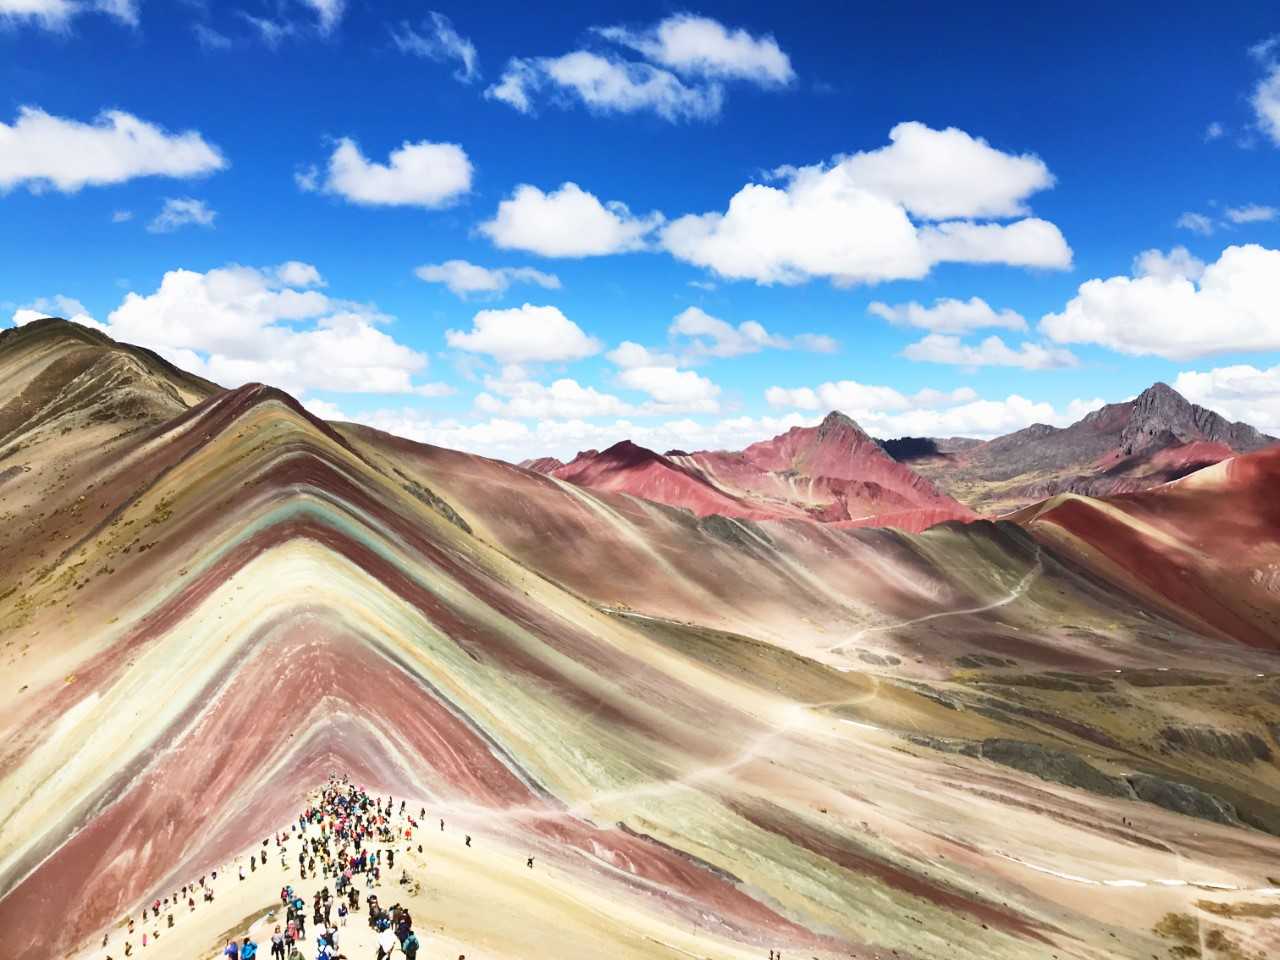 Jake's view of Rainbow Mountain in Peru